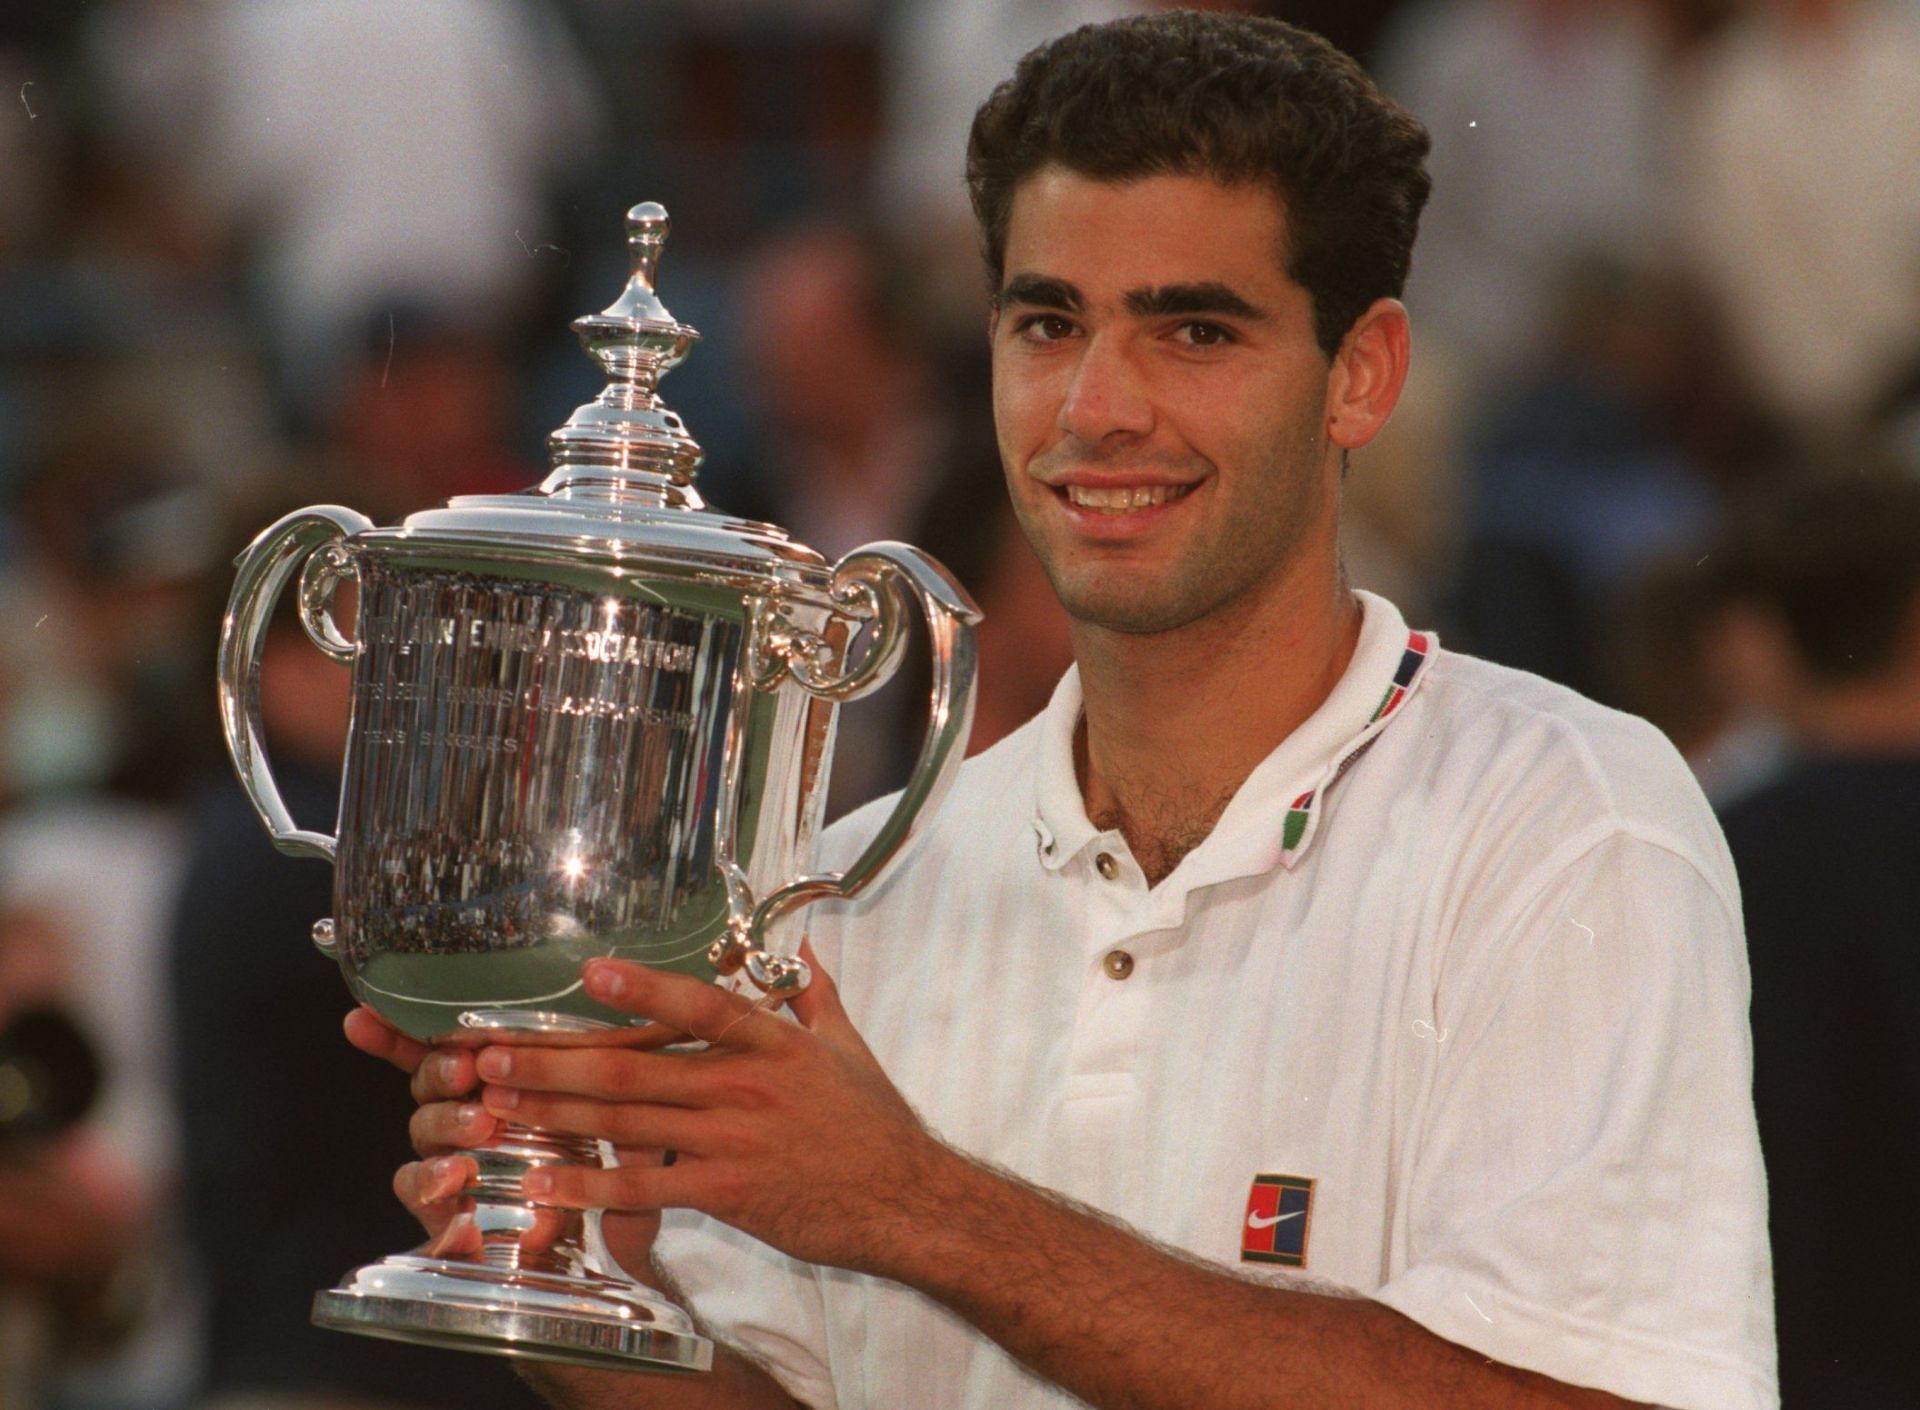 Pete Sampras defeated Andre Agassi to win the 1995 US Open title